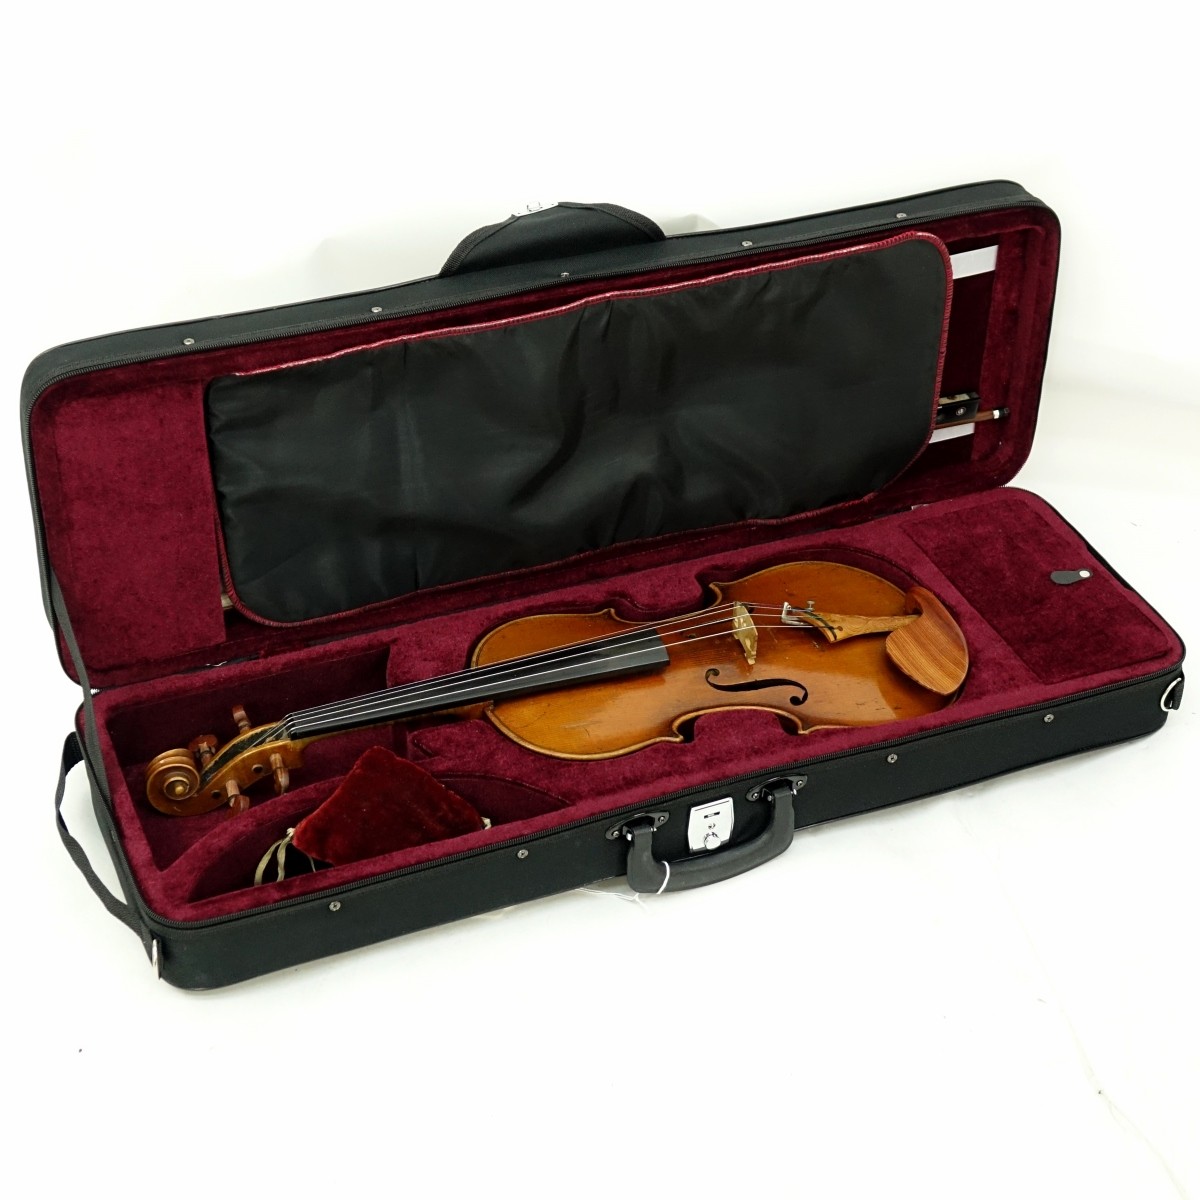 Giuseppe Pedrazzini Violin with Carrying Case